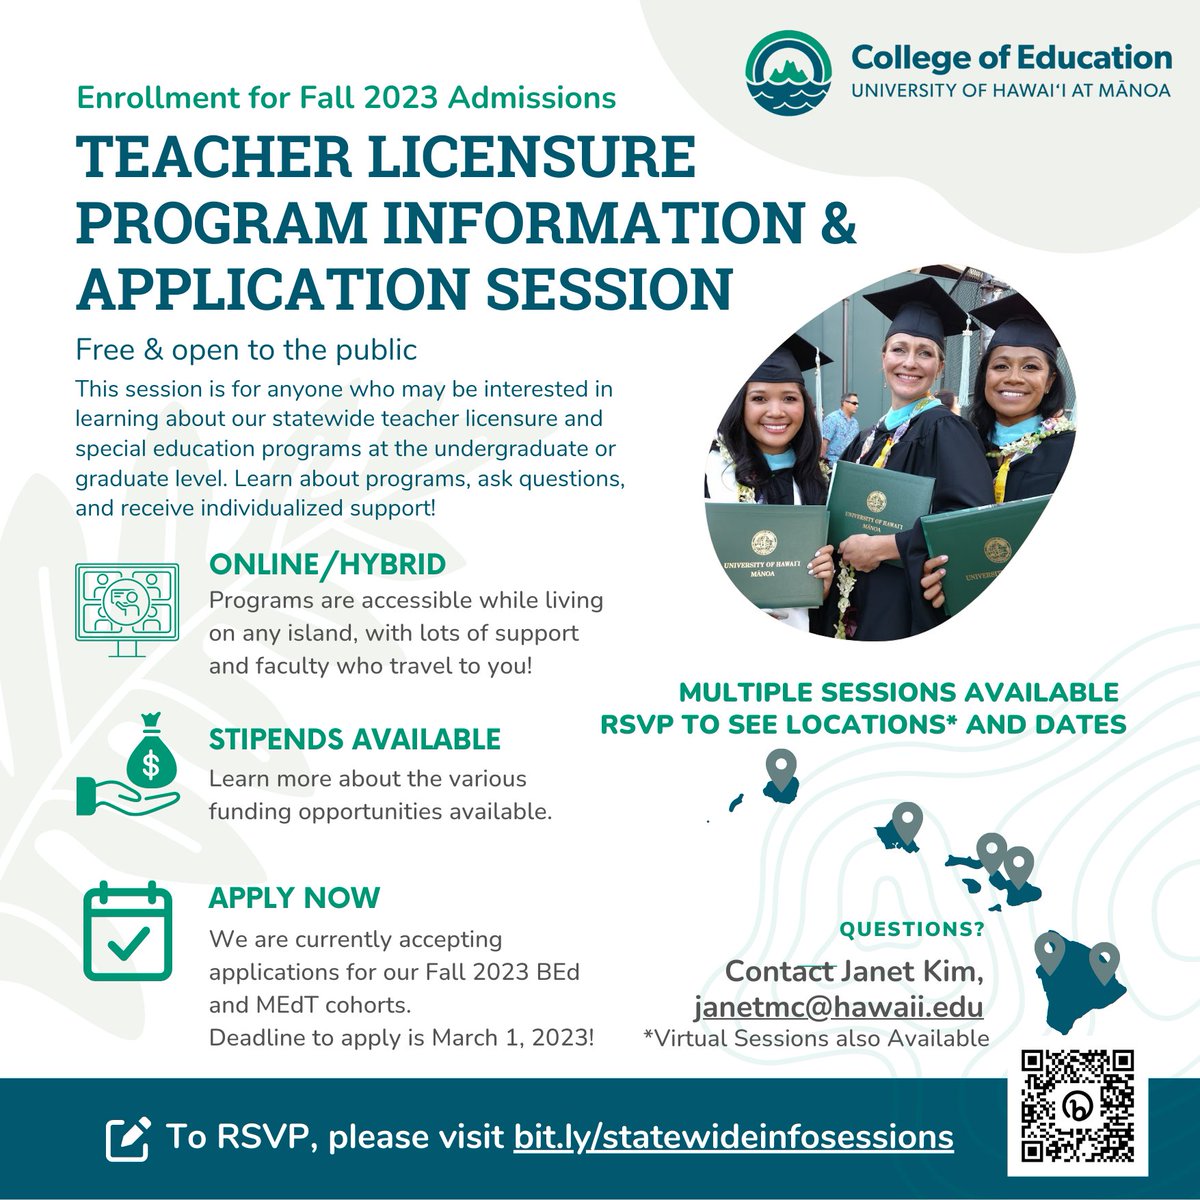 Excited to spend the day in Lāhainā! I'll be at Lāhainā Intermediate from 1:30pm- 4:30pm! Come say hi, ask questions, learn about our UHM teacher licensure and special education programs, or get assistance with applications!!!